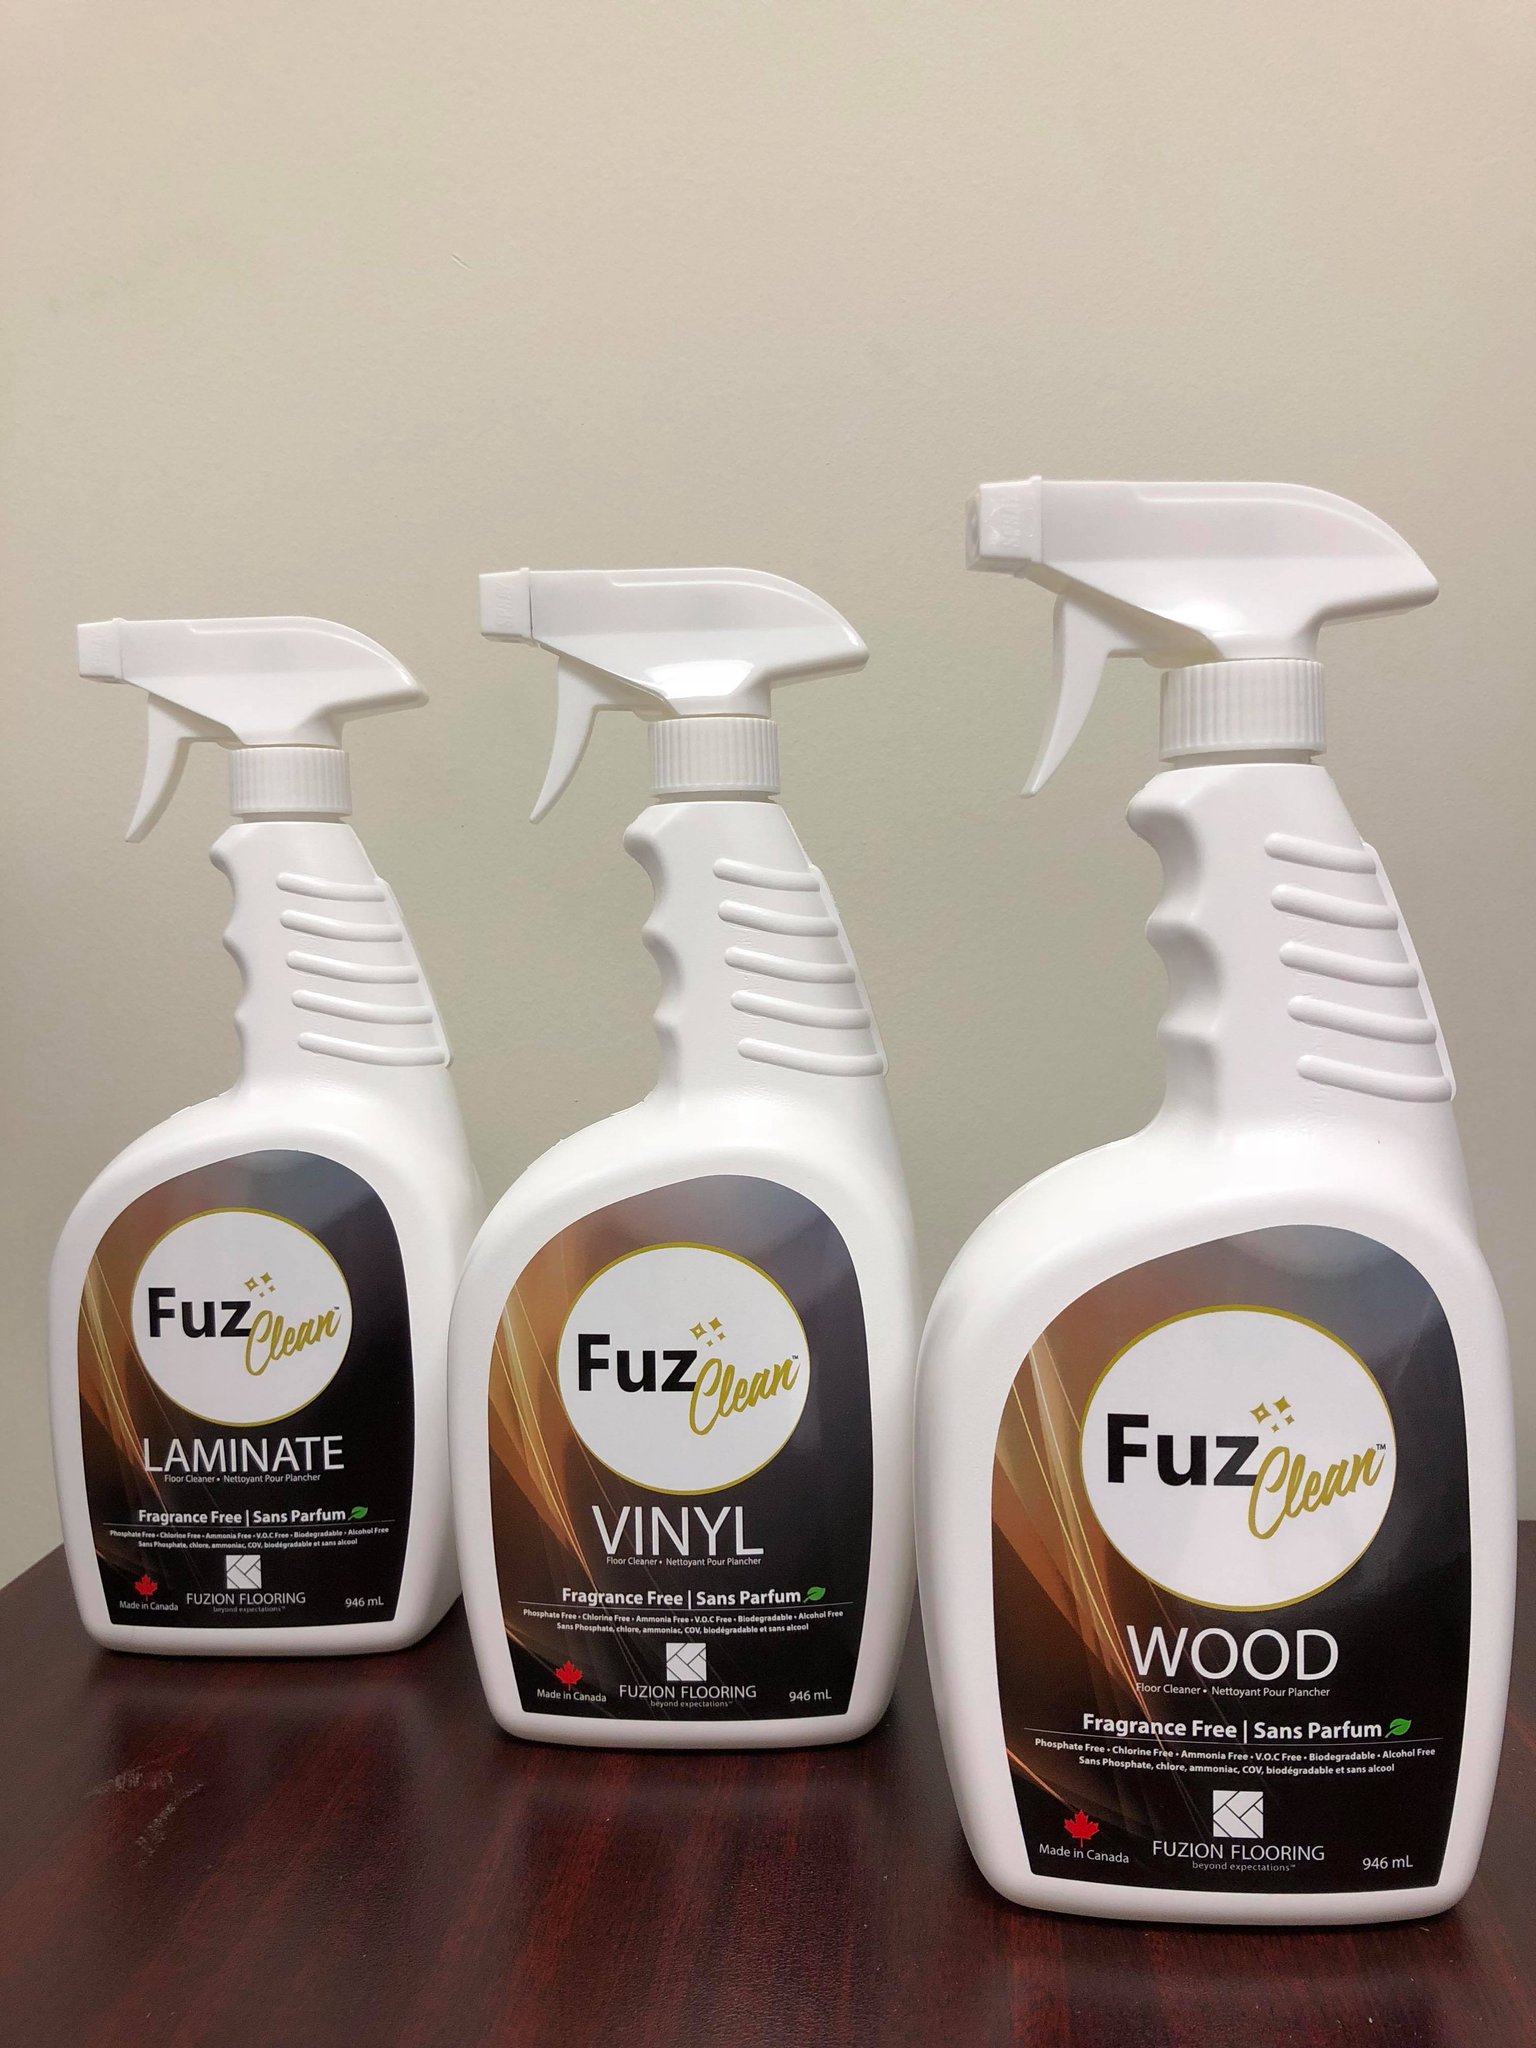 Fuzion Flooring On Twitter Introducing Fuzclean It Is Our Floor Cleaner That Will Leave Your Floor Looking Brand New And Flawless Keep Your Eye Out For More Information To Come On This Eco Friendly Cleaning Product Https T Co Pvudhrk6hw